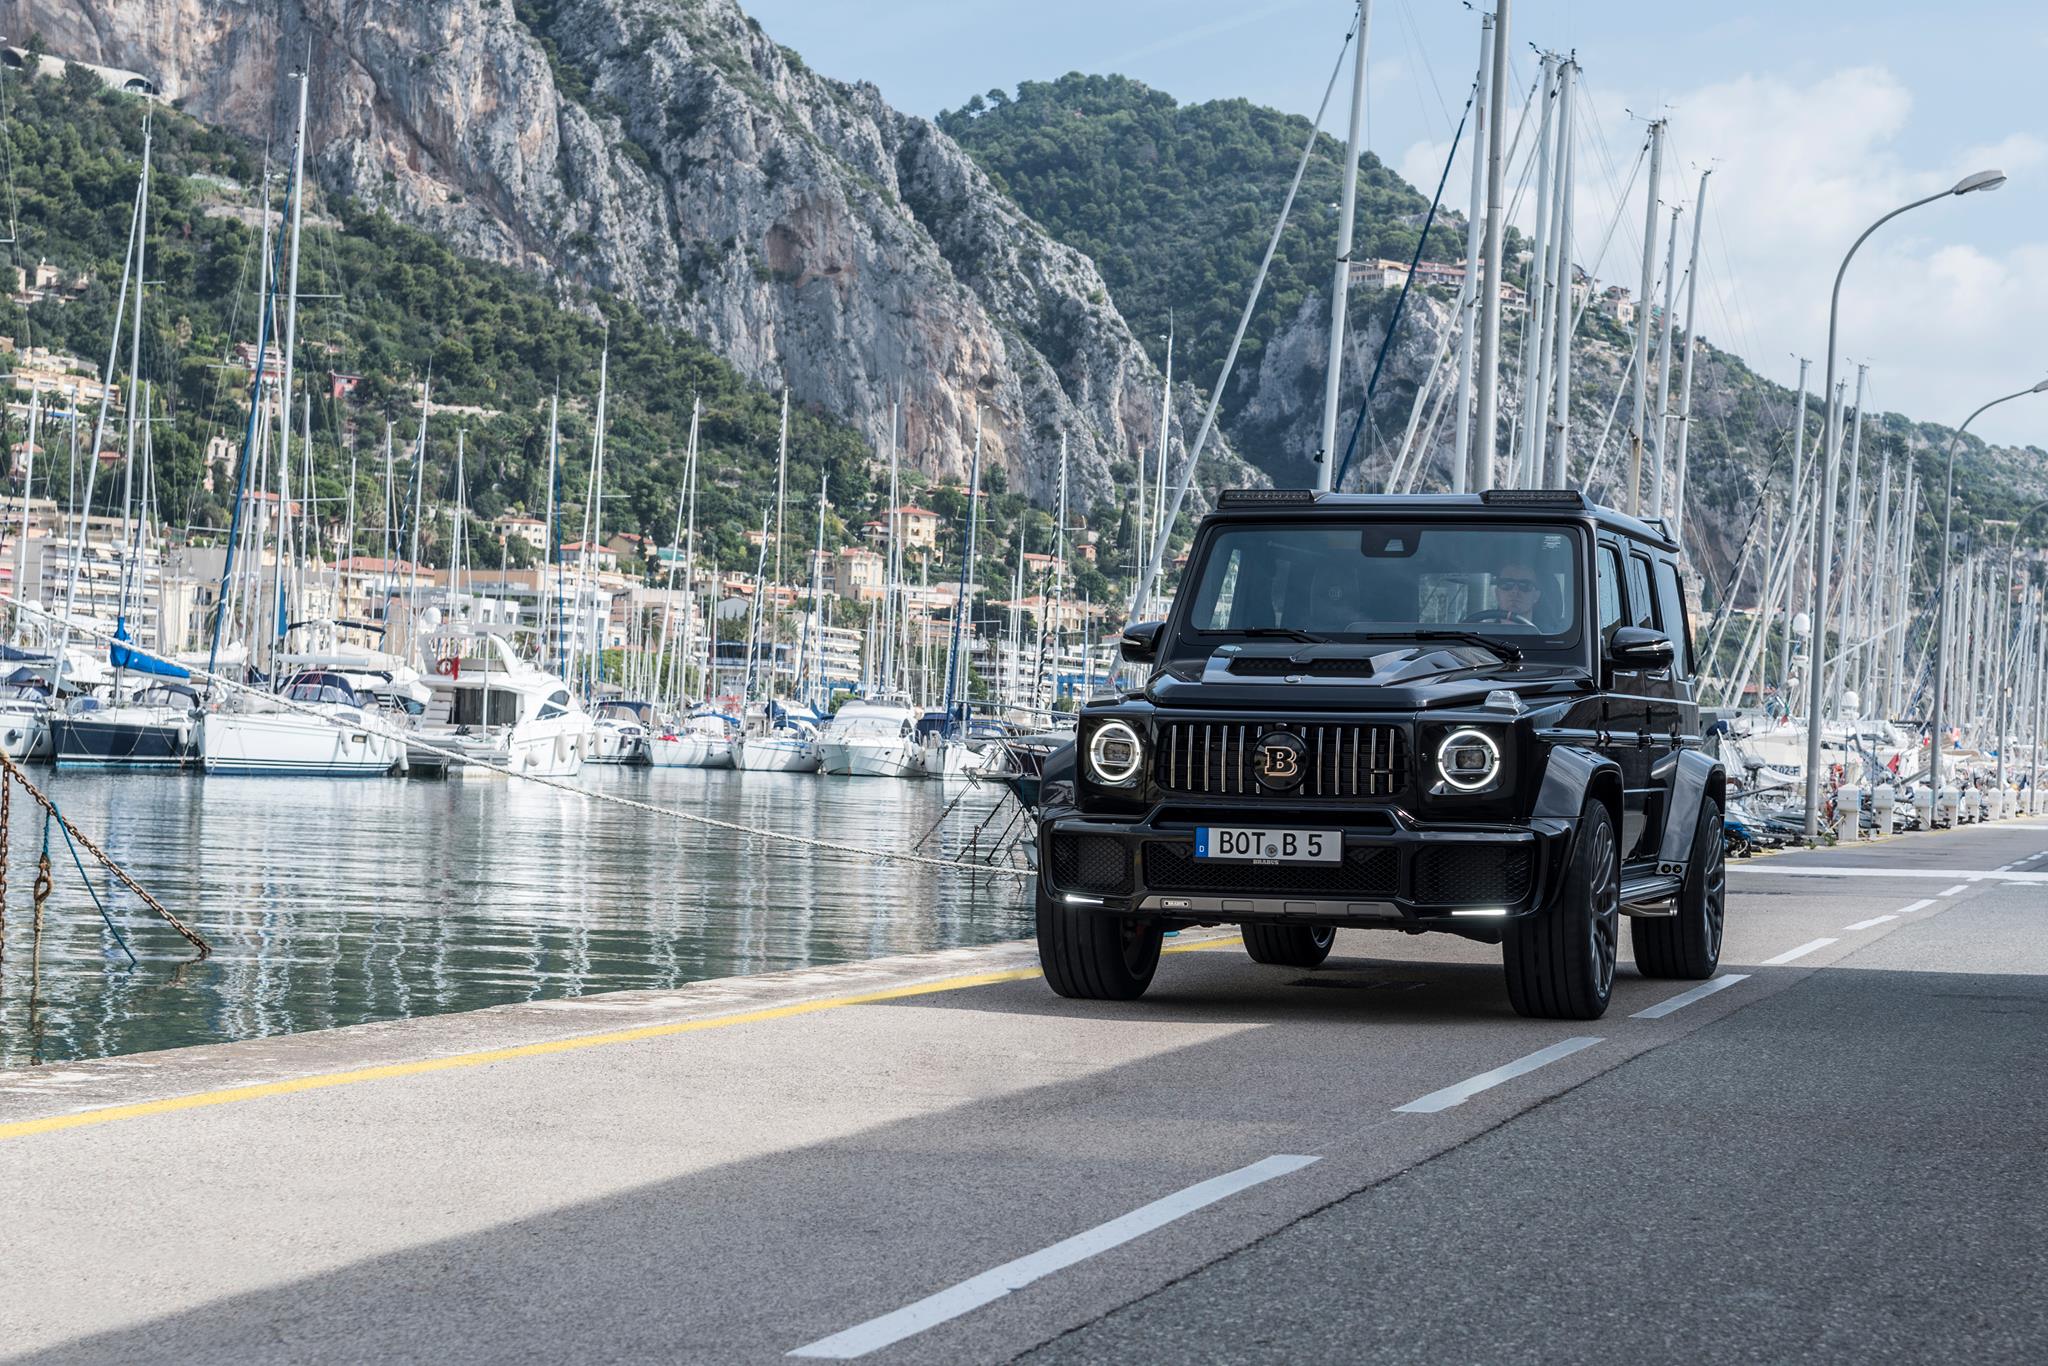 2019 Mercedes Amg G63 Tuned By Brabus Makes 700 Hp